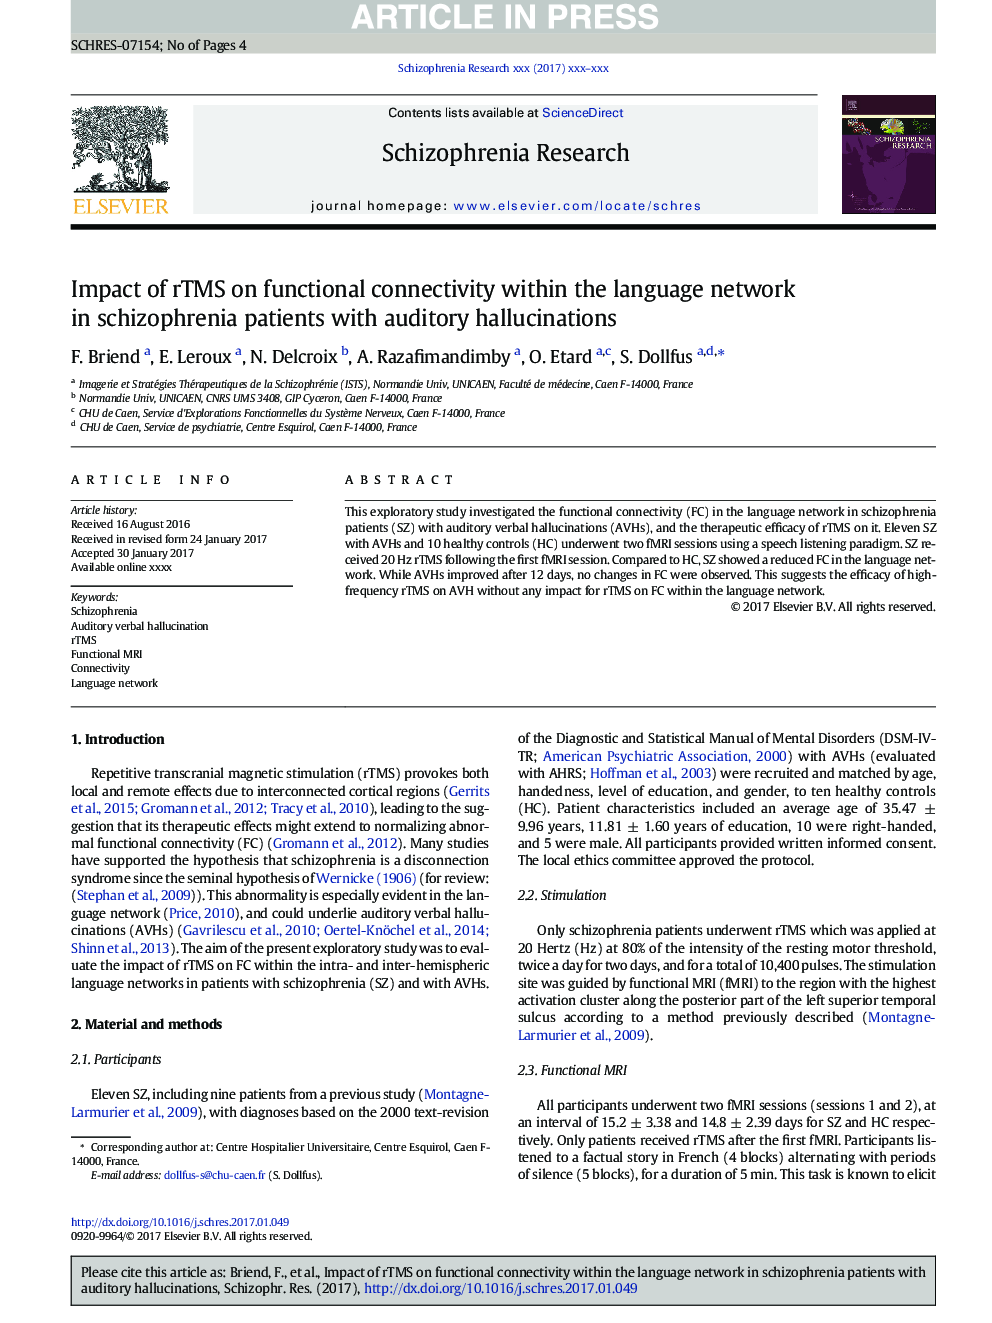 Impact of rTMS on functional connectivity within the language network in schizophrenia patients with auditory hallucinations